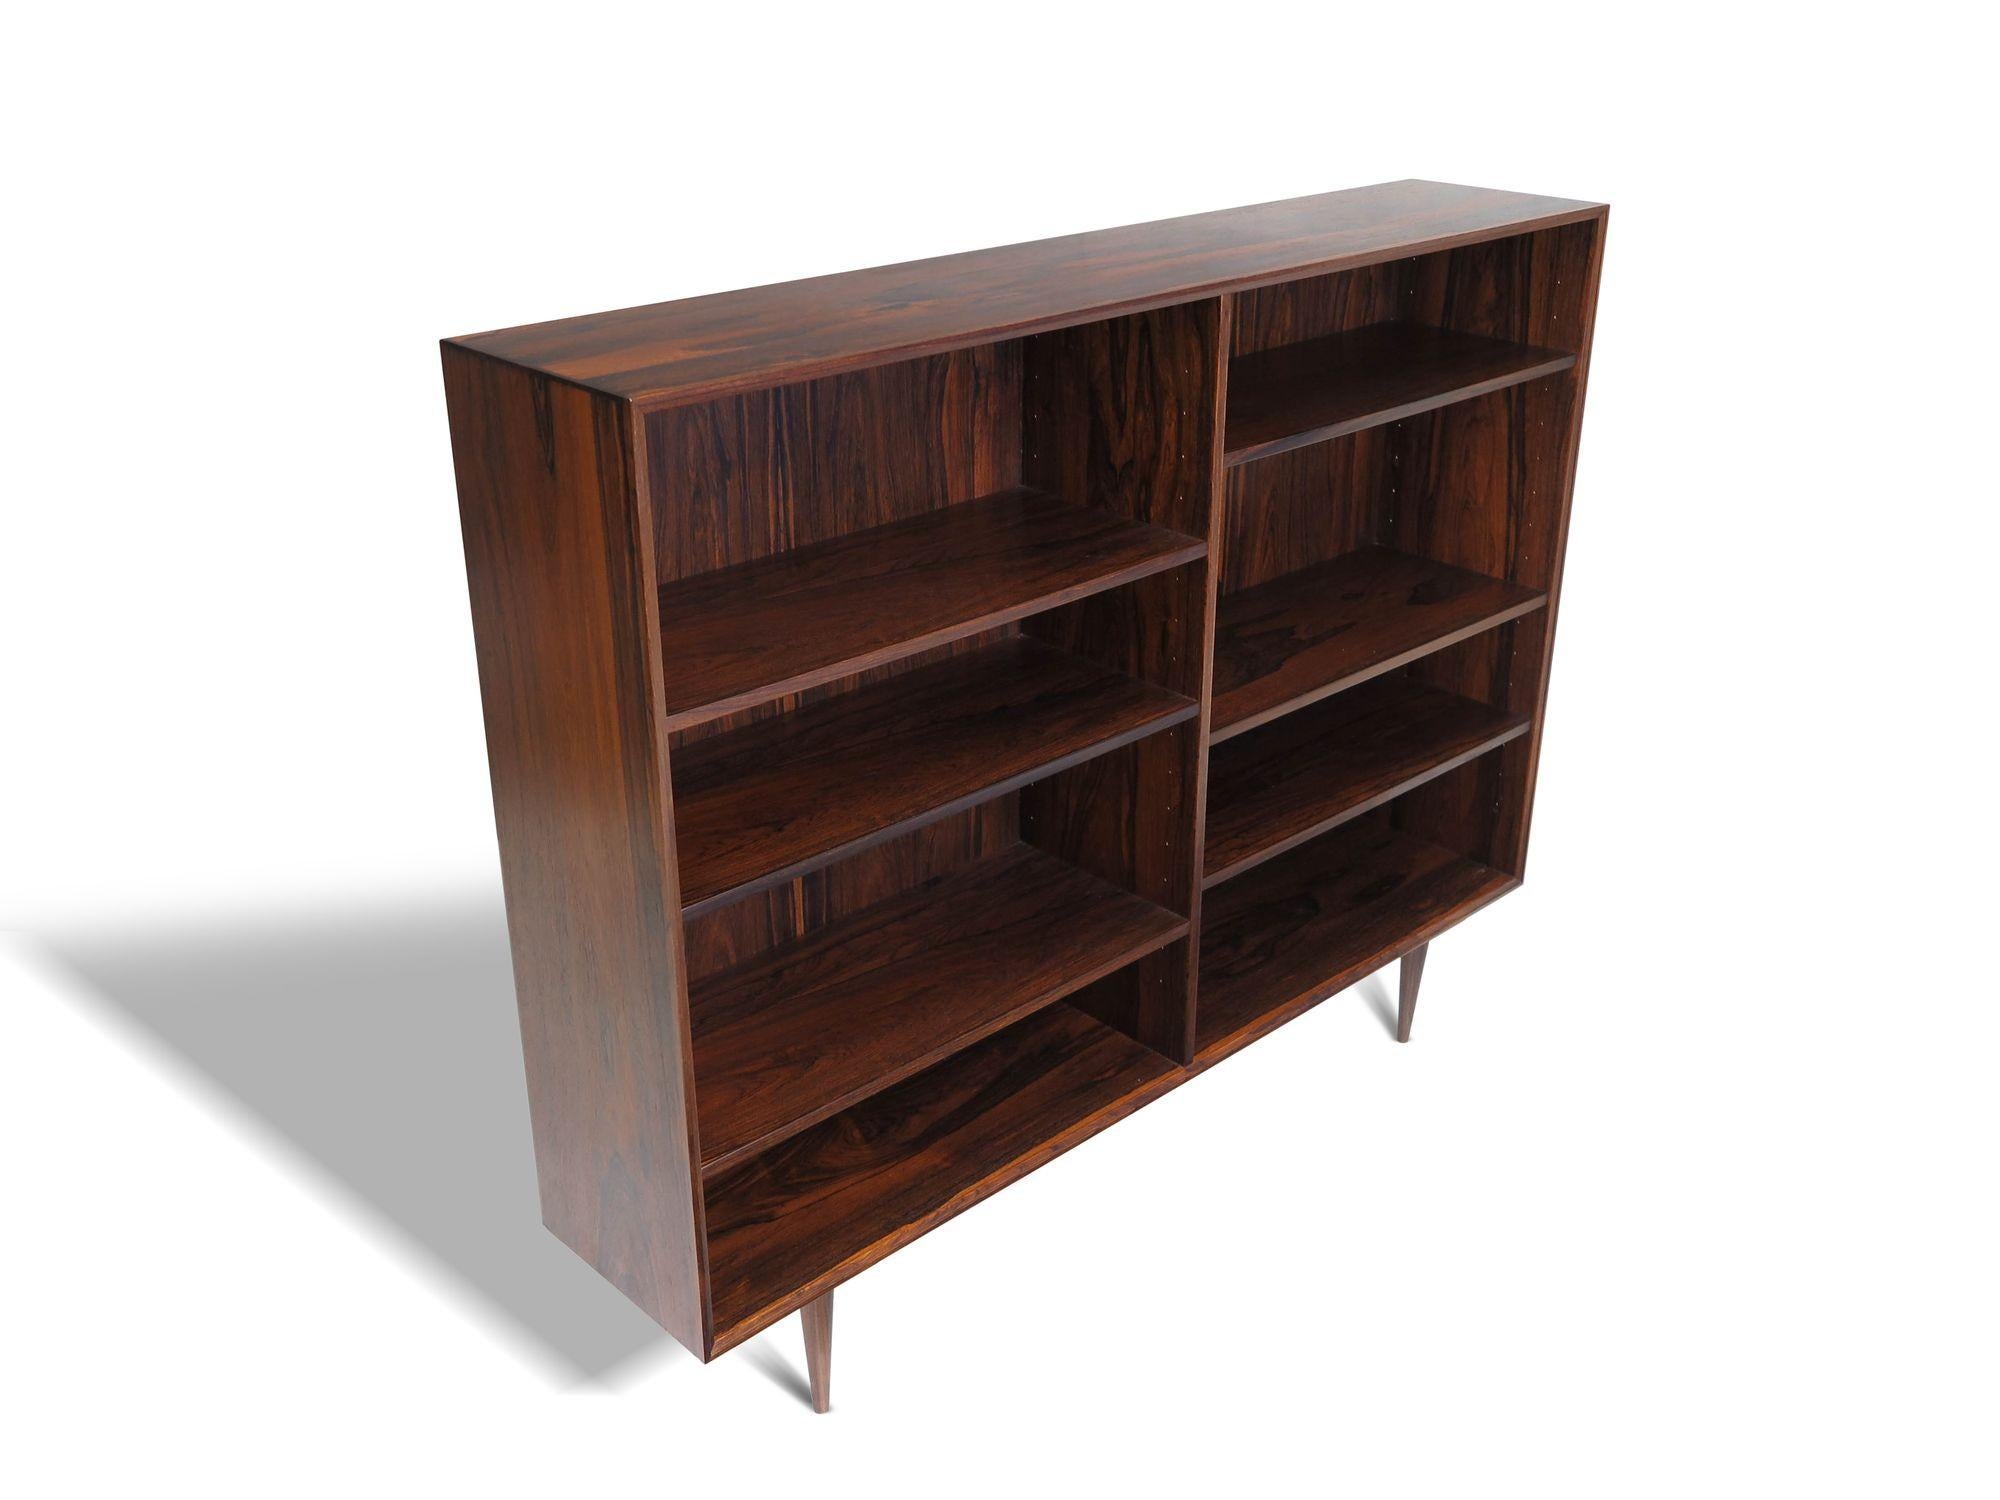 Finely crafted Brazilian rosewood bookcase with mitered edges, series of adjustable shelves, and raised on tapered legs.
In excellent condition with minor signs of age and use.

Measurements
W 60.25